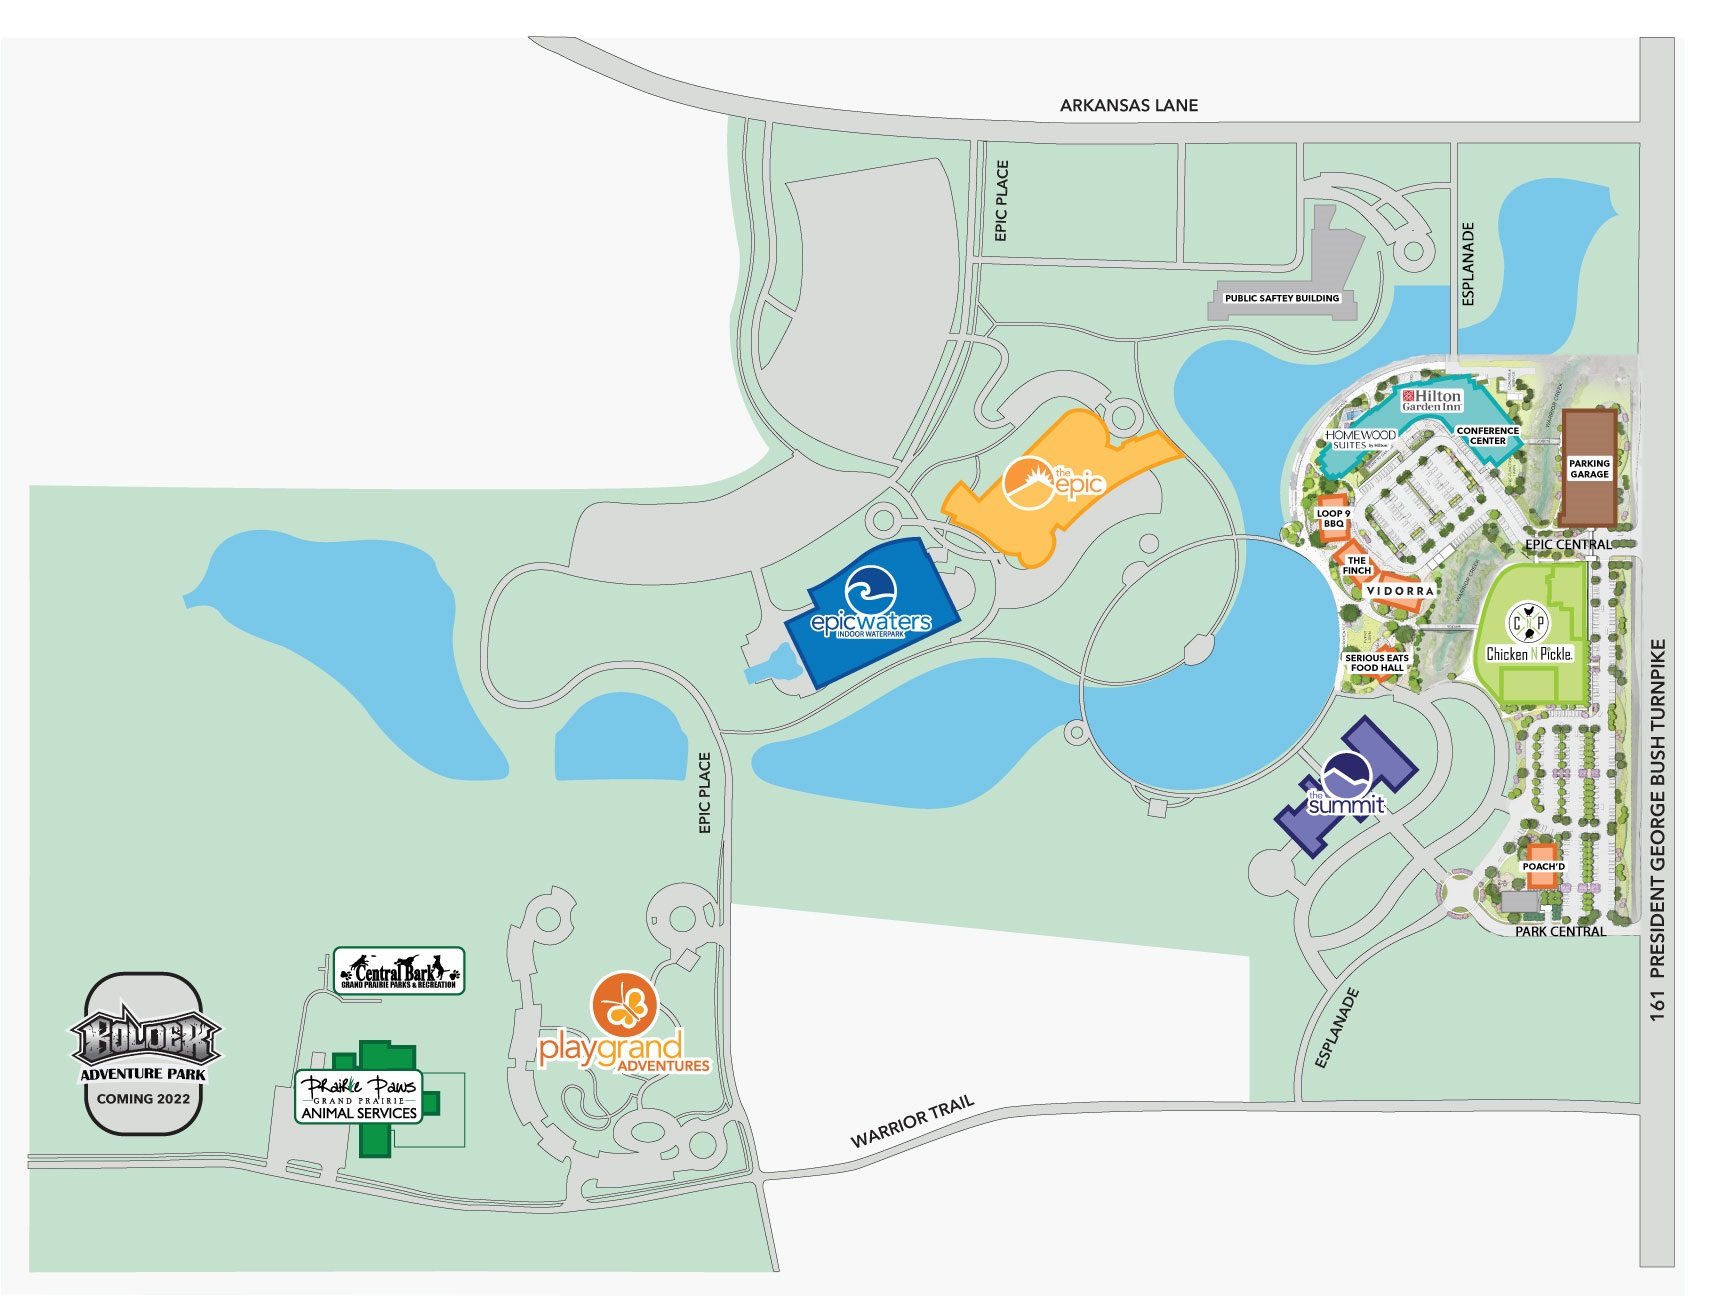 Map of current attractions and development areas for new restaurants and hotels